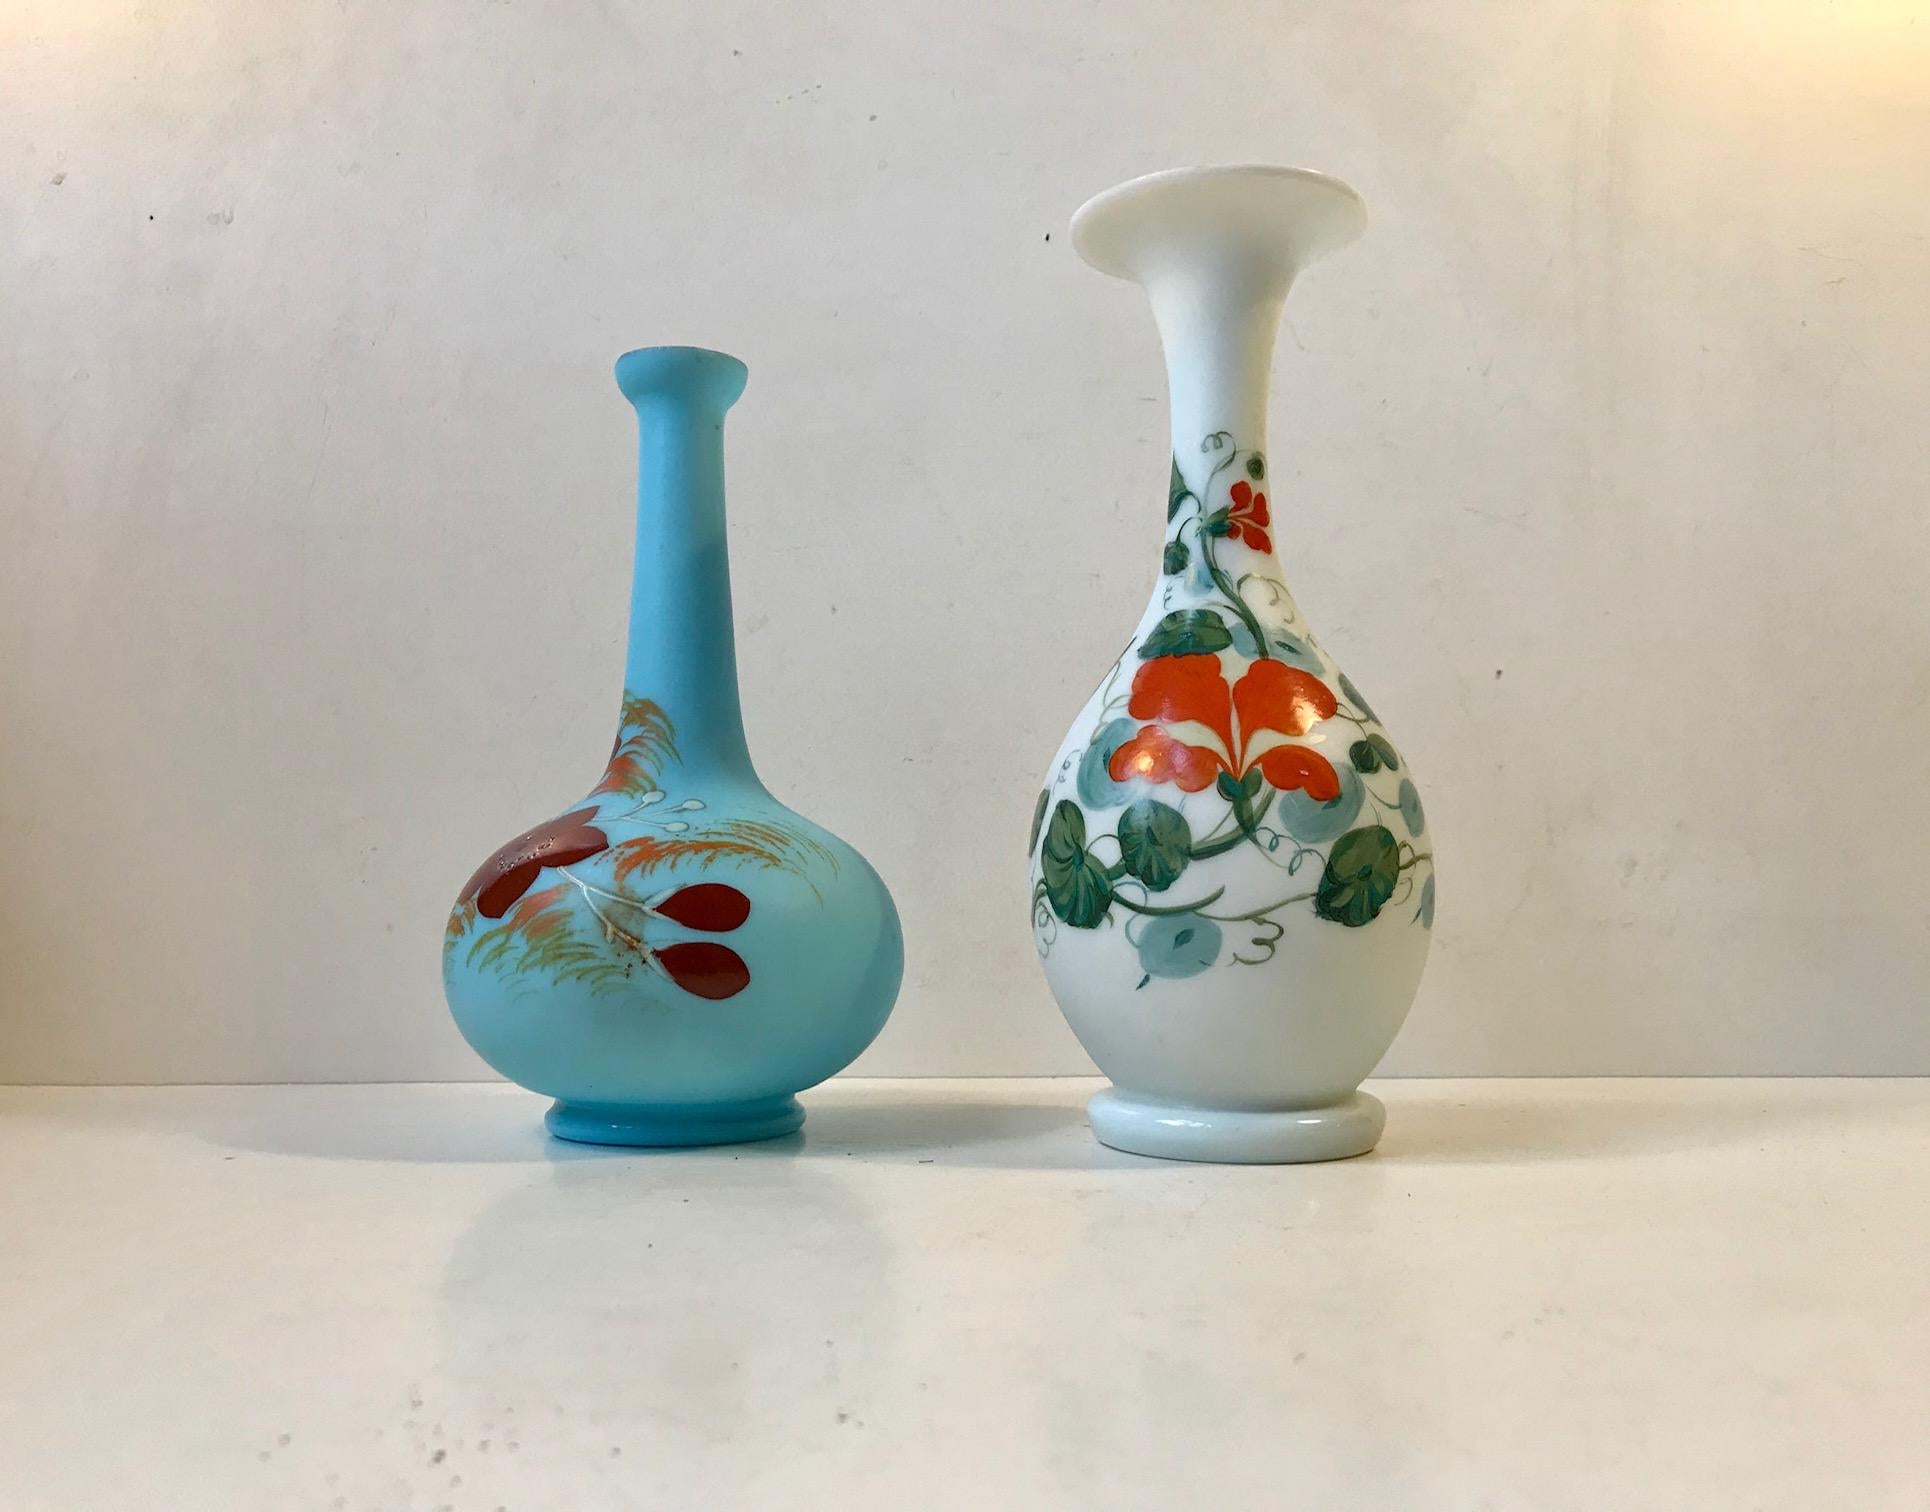 Unmatched set of unique and antique Danish opaline glass vases. They are hand blown and handprinted with floral motifs. Both created at Fyns Glasværk (later bought by Holmegaard) in Denmark circa 1900. Measure: Heights 22/19 cm.